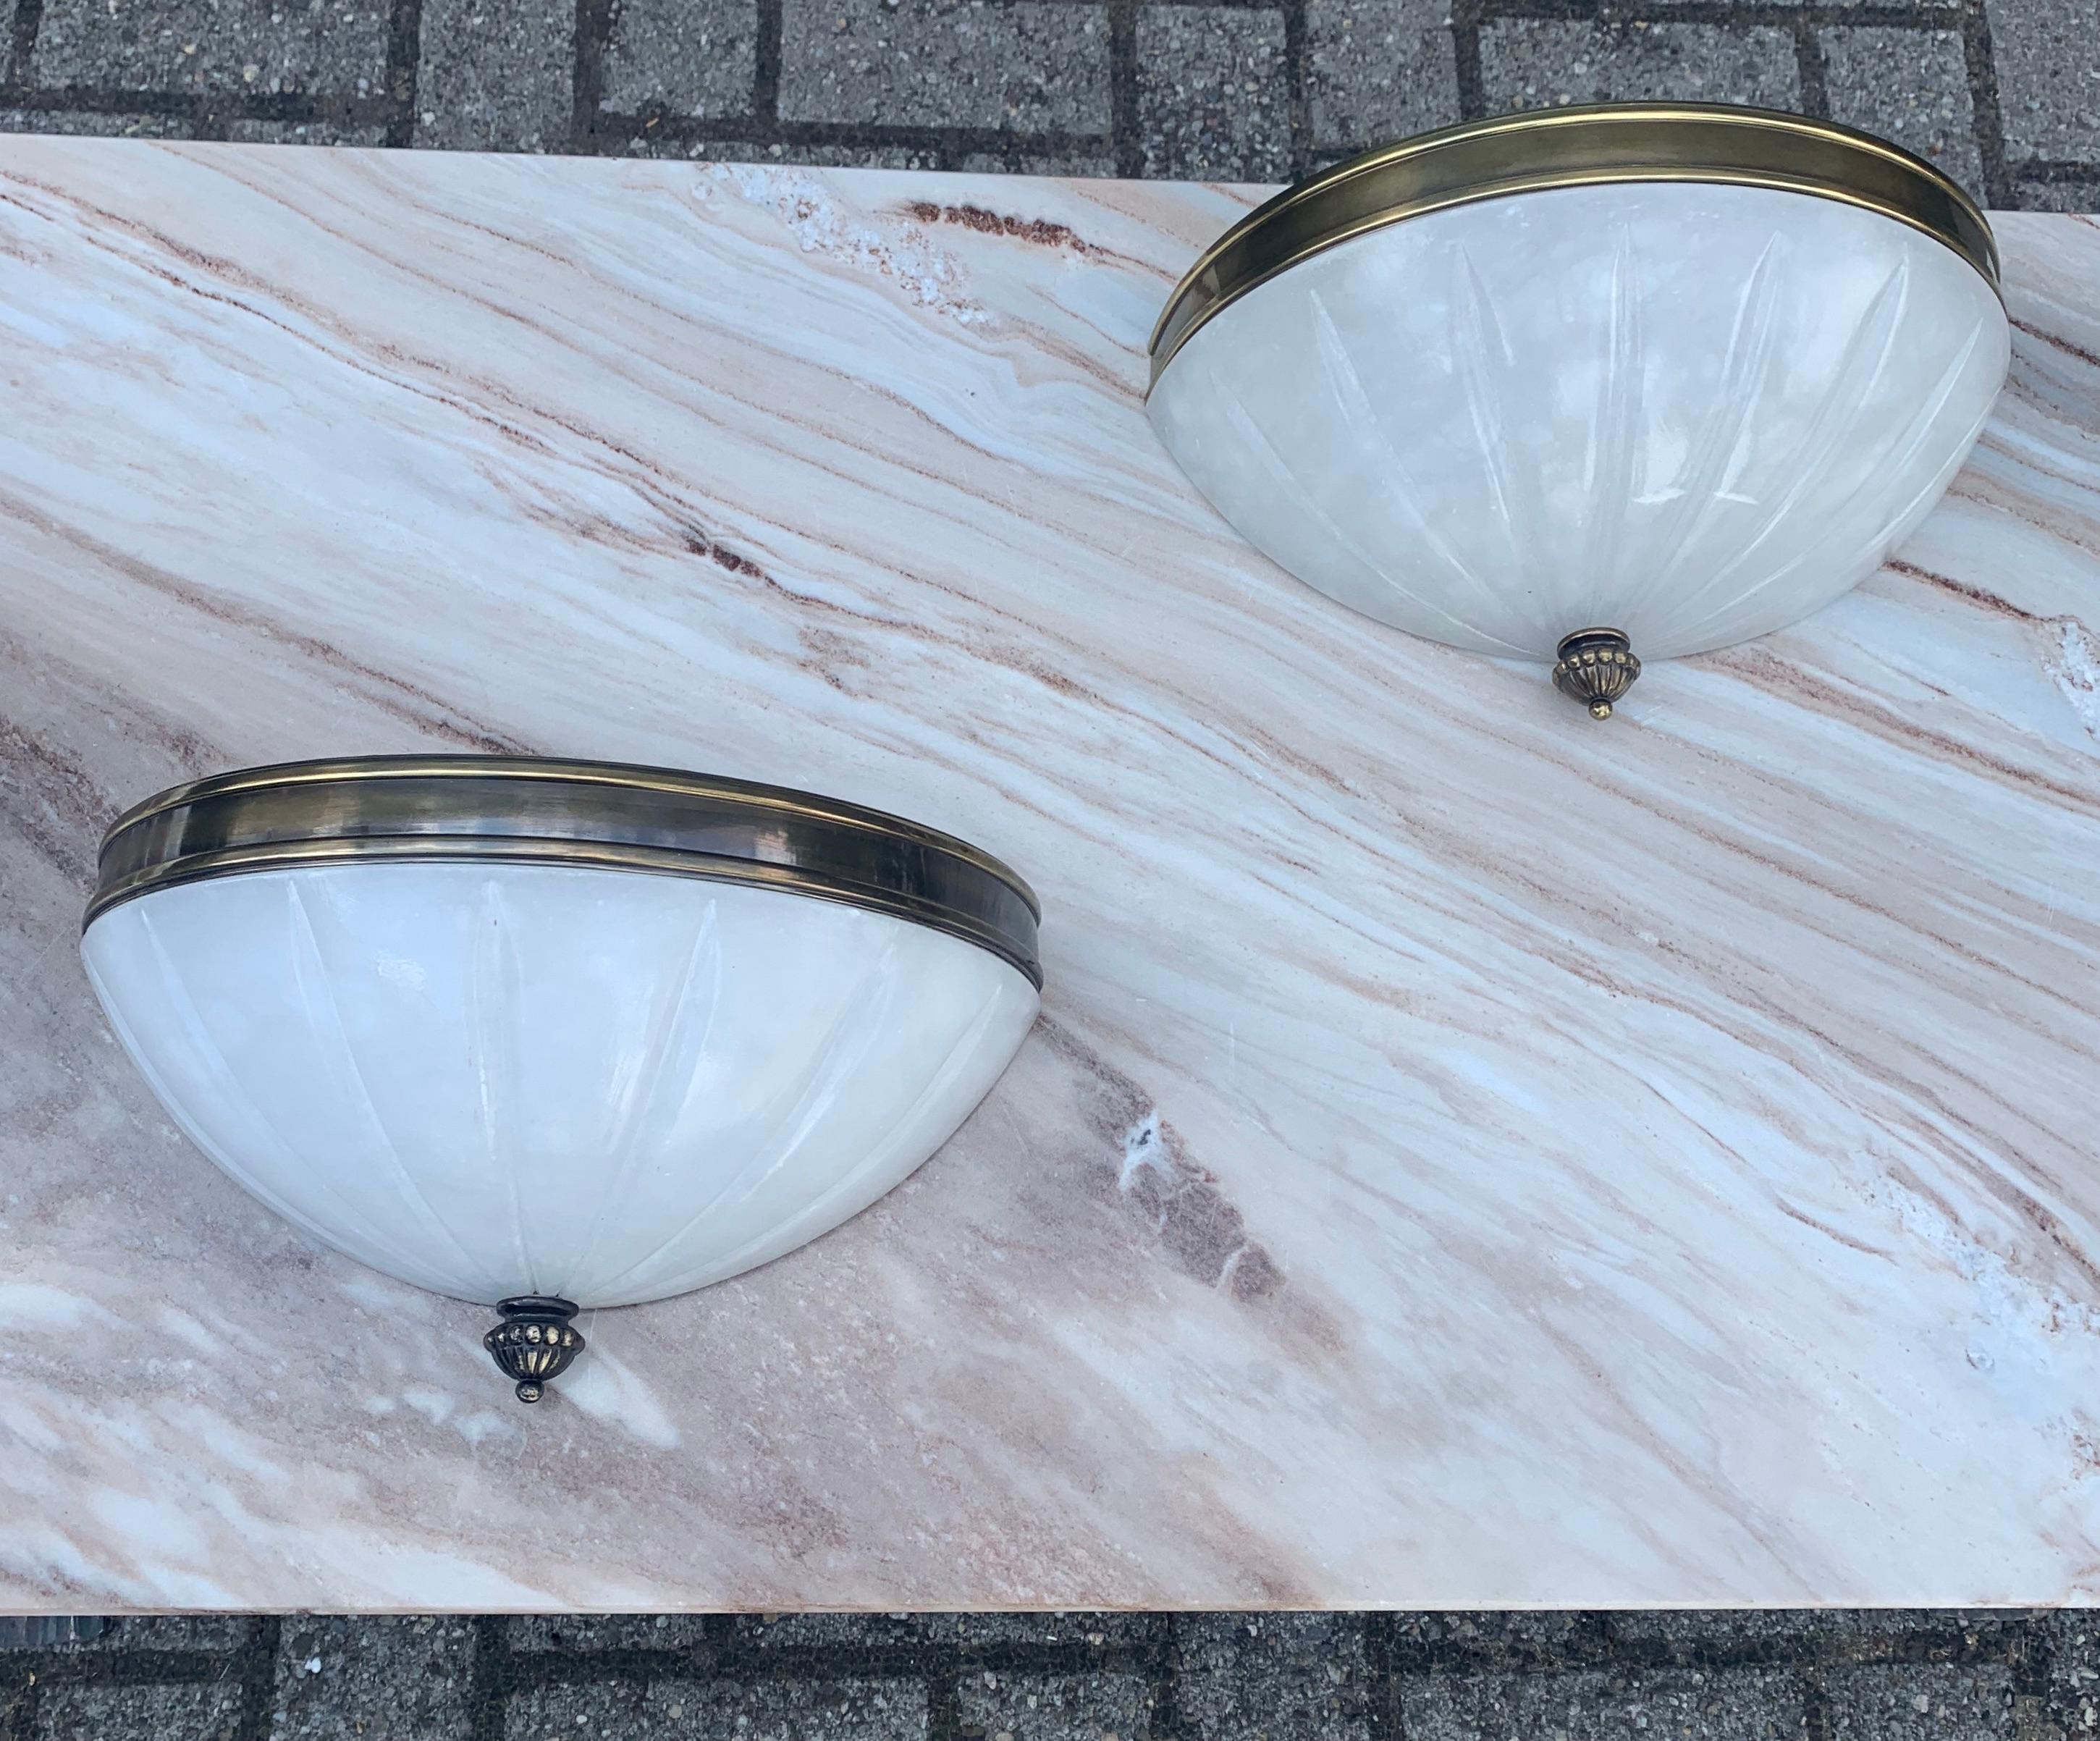 Very rare design and practical size, set of alabaster wall sconces.

This identical pair of excellent quality and superb condition sconces could be your perfect lighting solution. We have never seen this type of Hollywood Regency style alabster